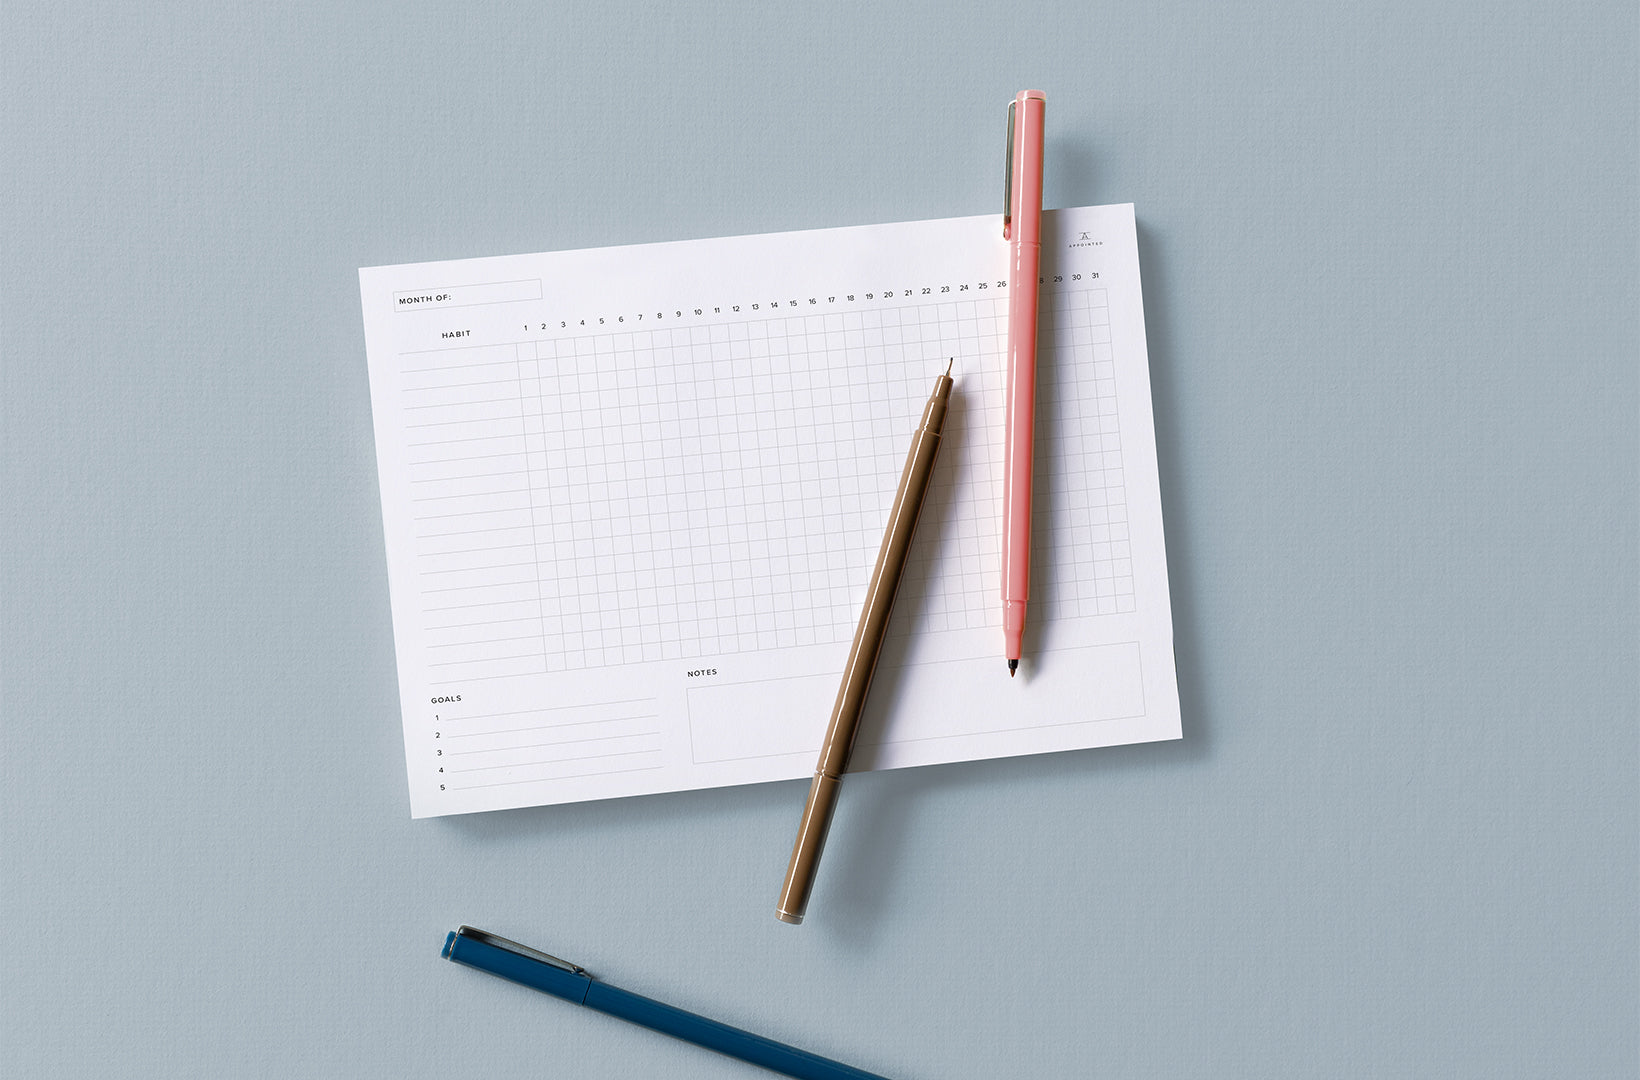 The Appointed Habit Tracker pad sits against a light gray background. Three fine-tip Le Pens in various colors are strewn across the surface.